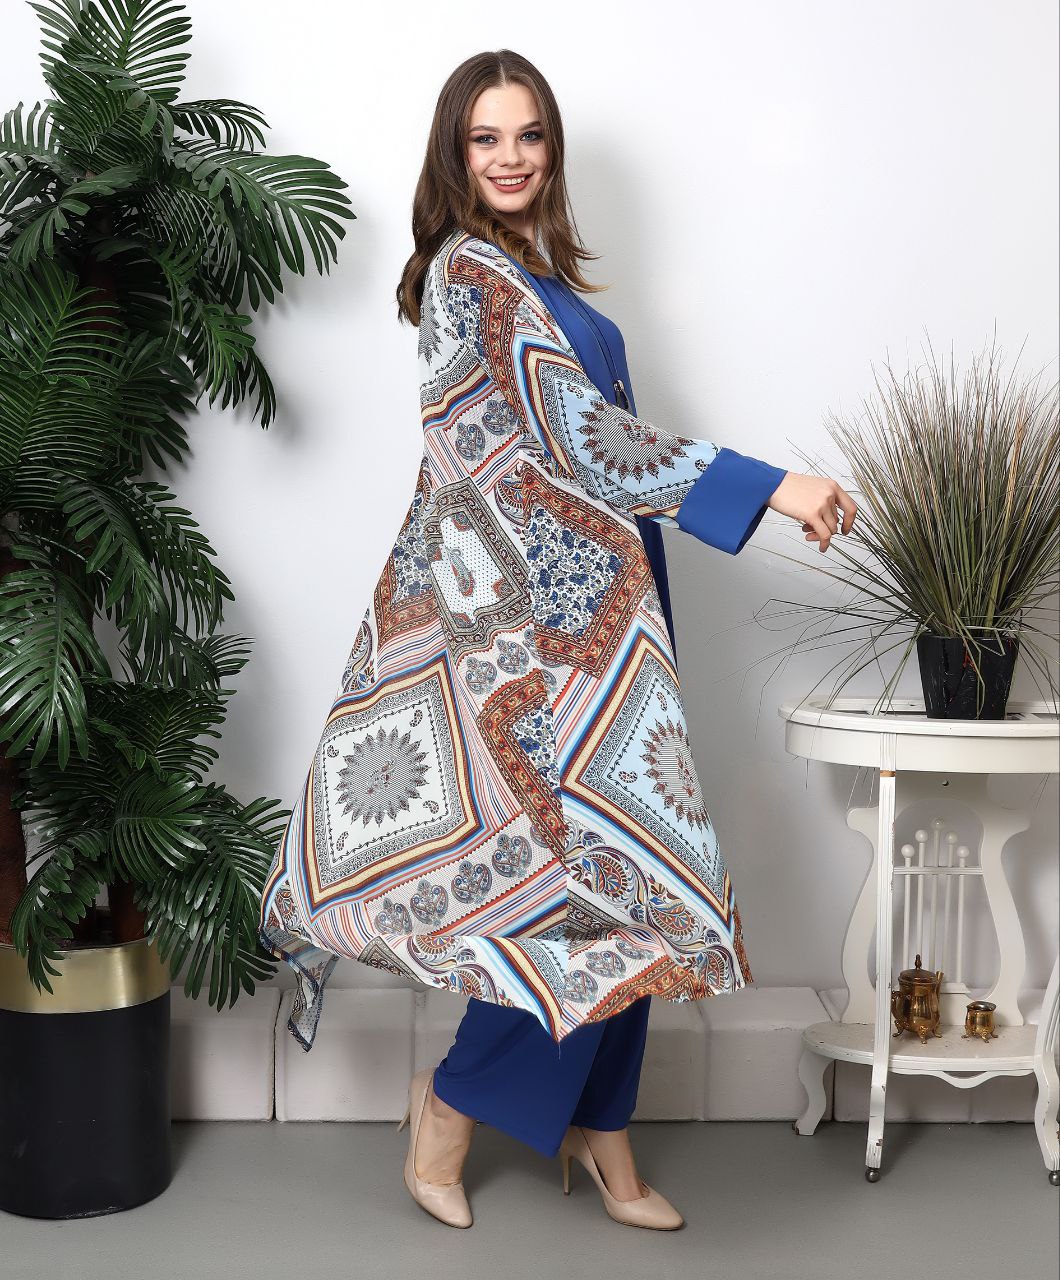 Combine Three Peices Modern Suit in Blue with Pattern